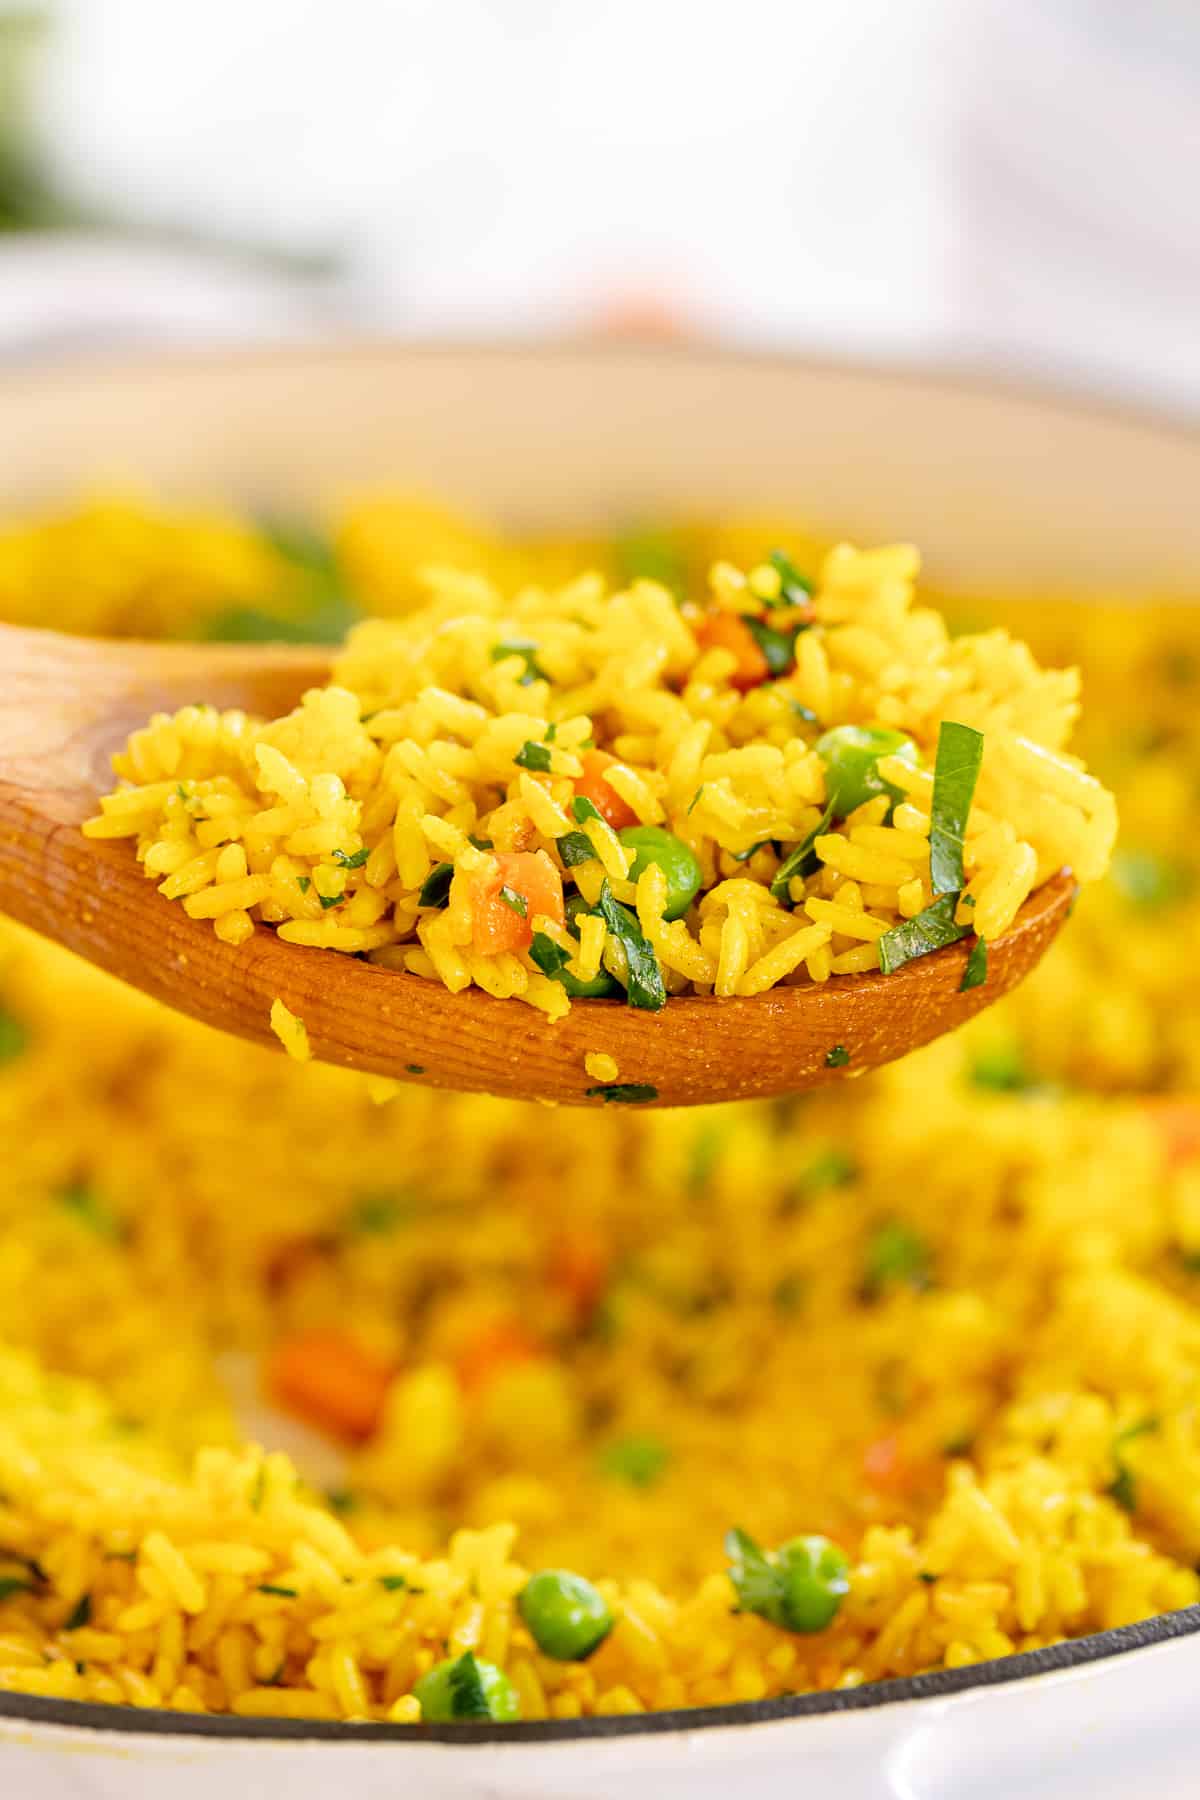 A wooden spoon holding a scoop of Yellow Rice.